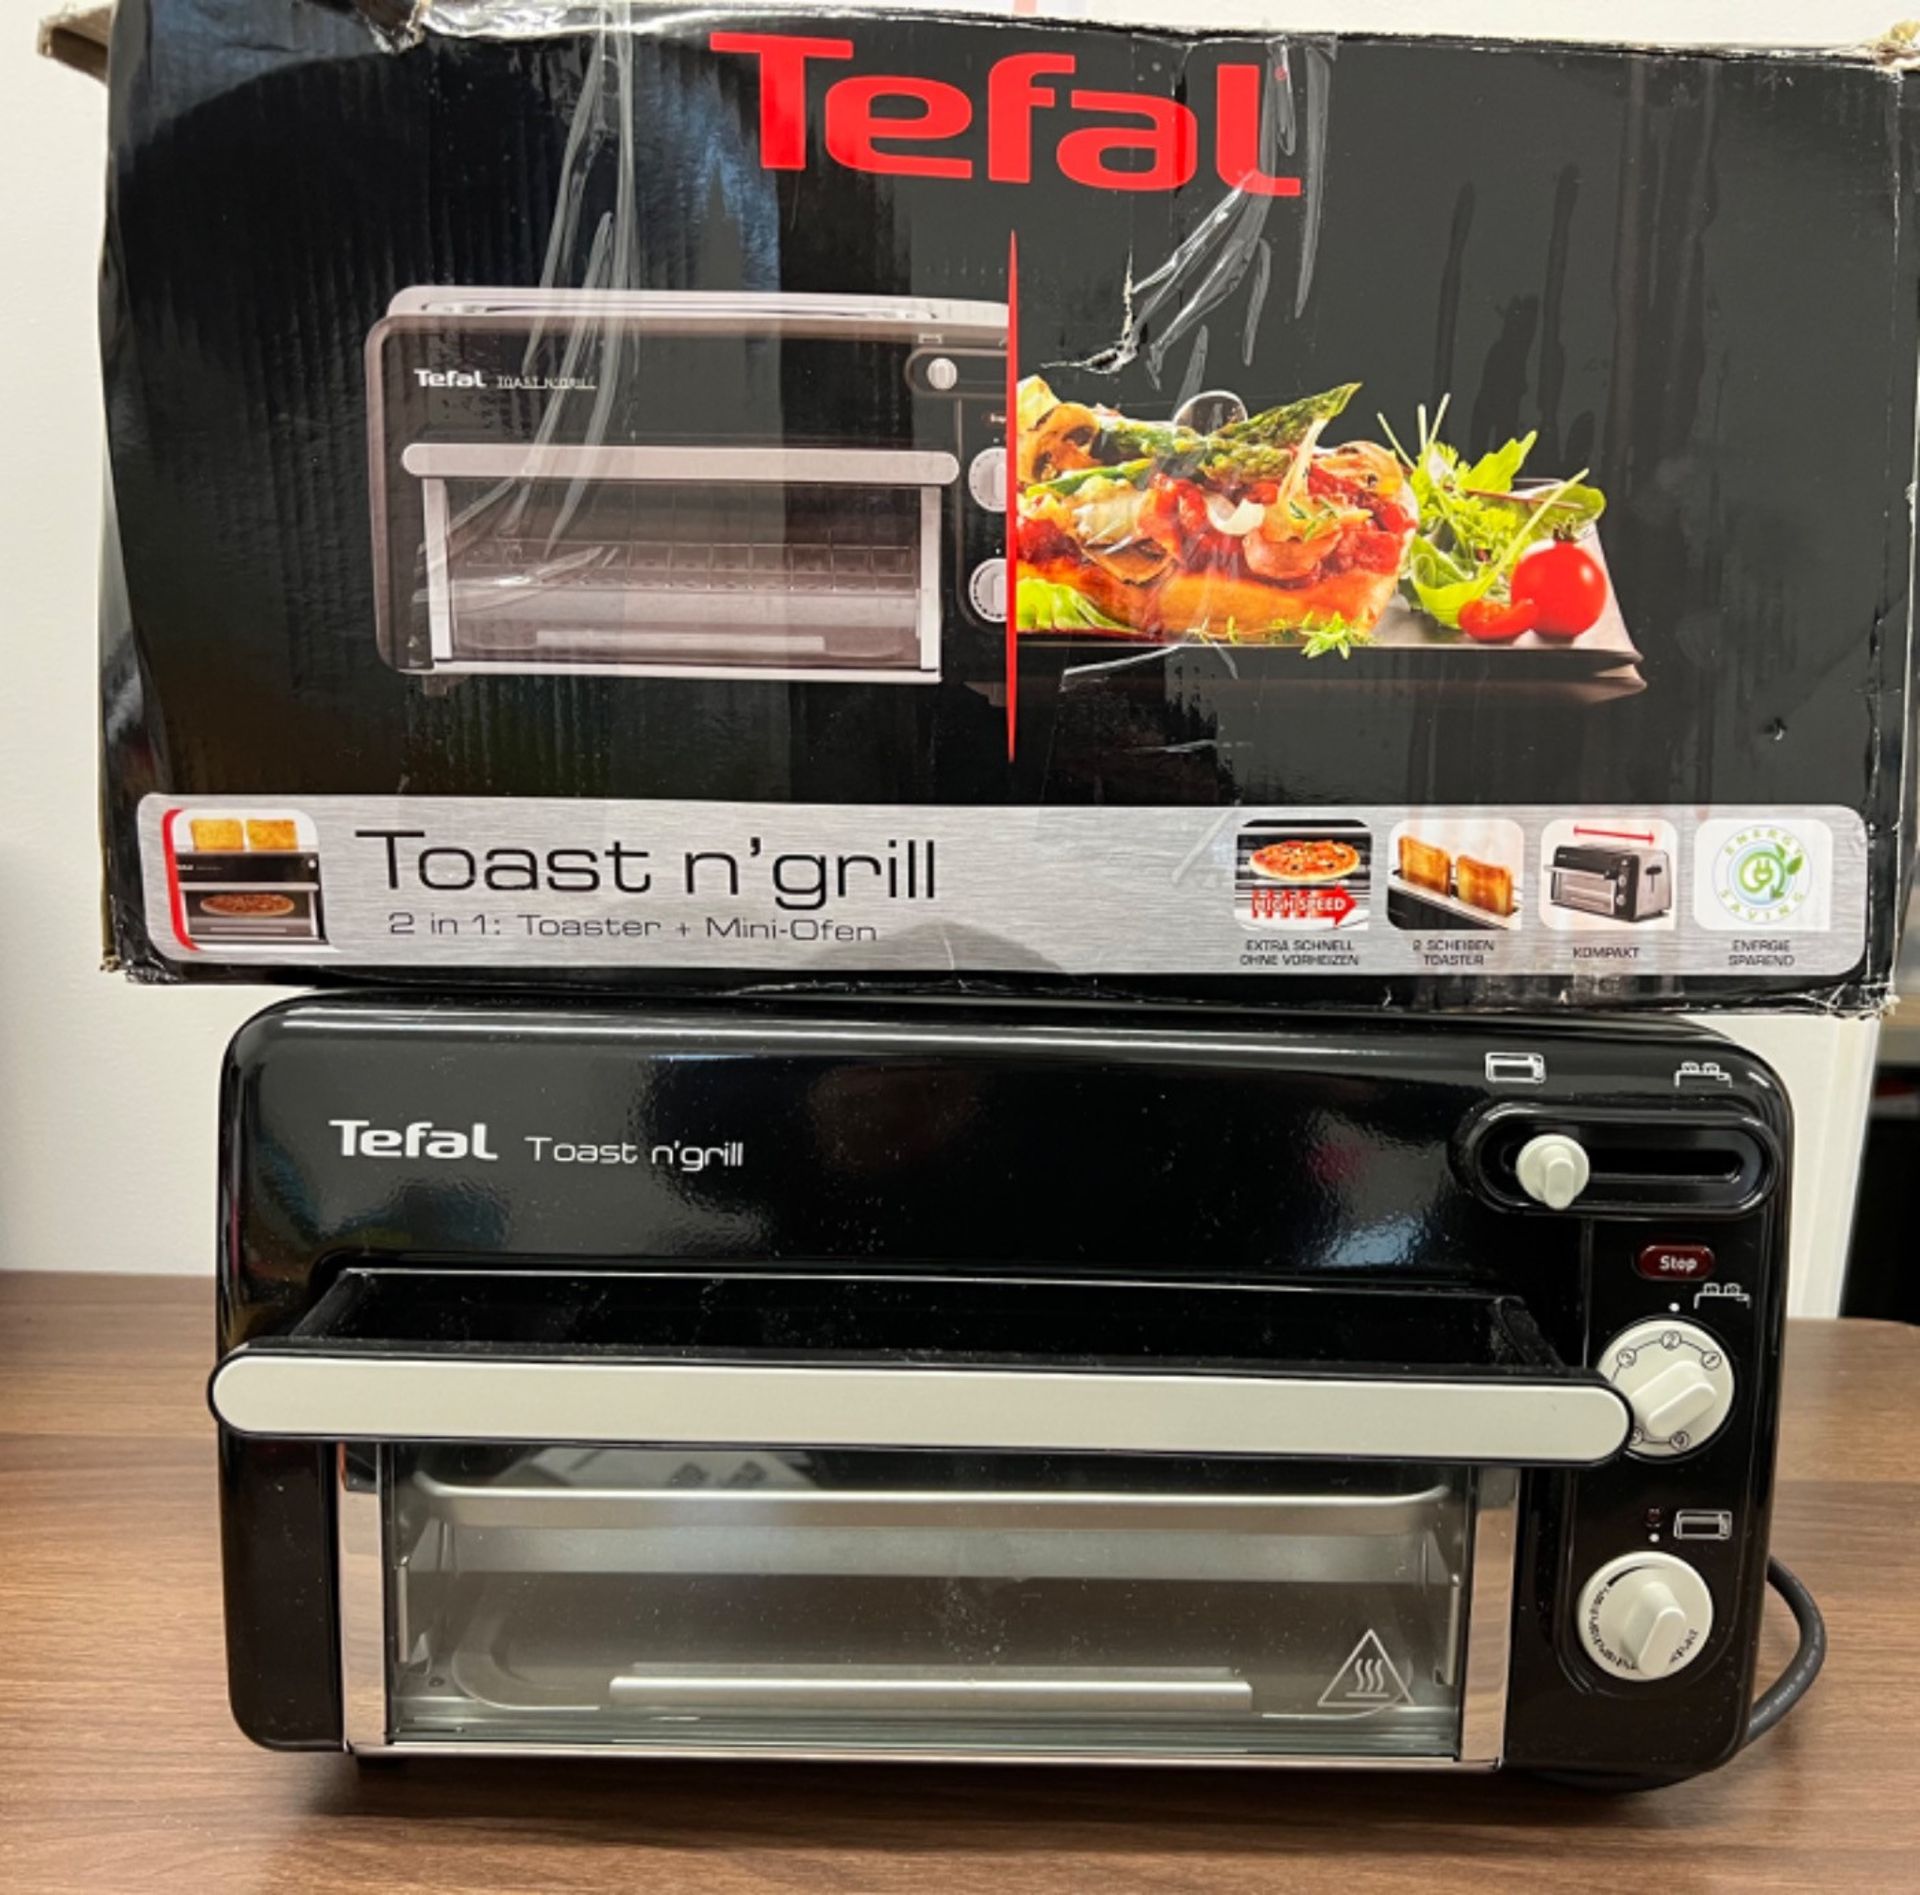 RRP £86.00 Tefal TL 6008 Toast n Grill 2 in 1 Toaster Grill and mini oven for toasting and grilli - Bild 2 aus 3